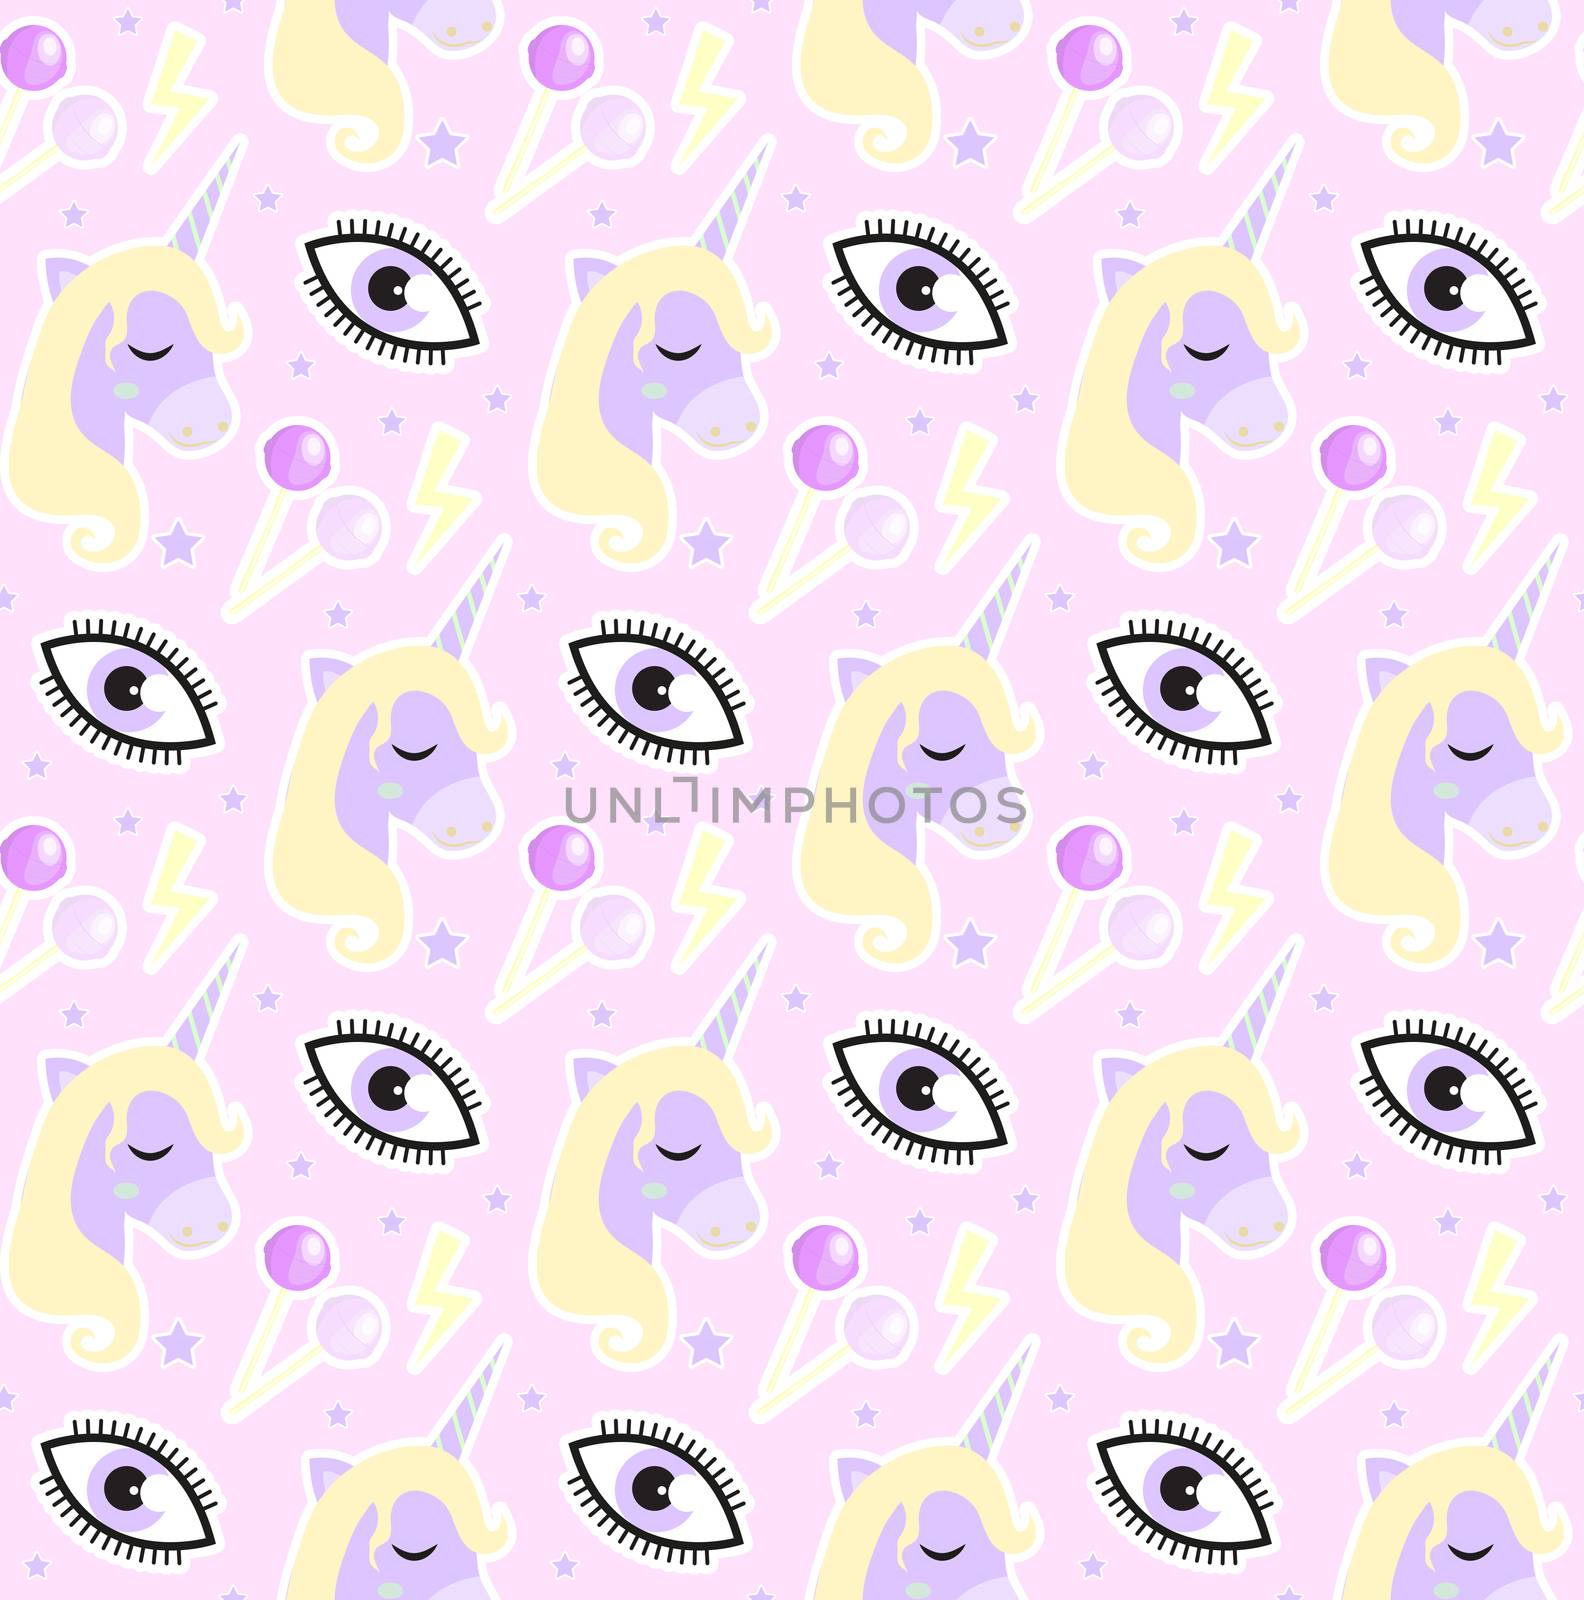 Magic Unicorn seamless pattern. Modern fairytale endless textures, magical repeating backgrounds. Cute baby backdrops. illustration. by lucia_fox